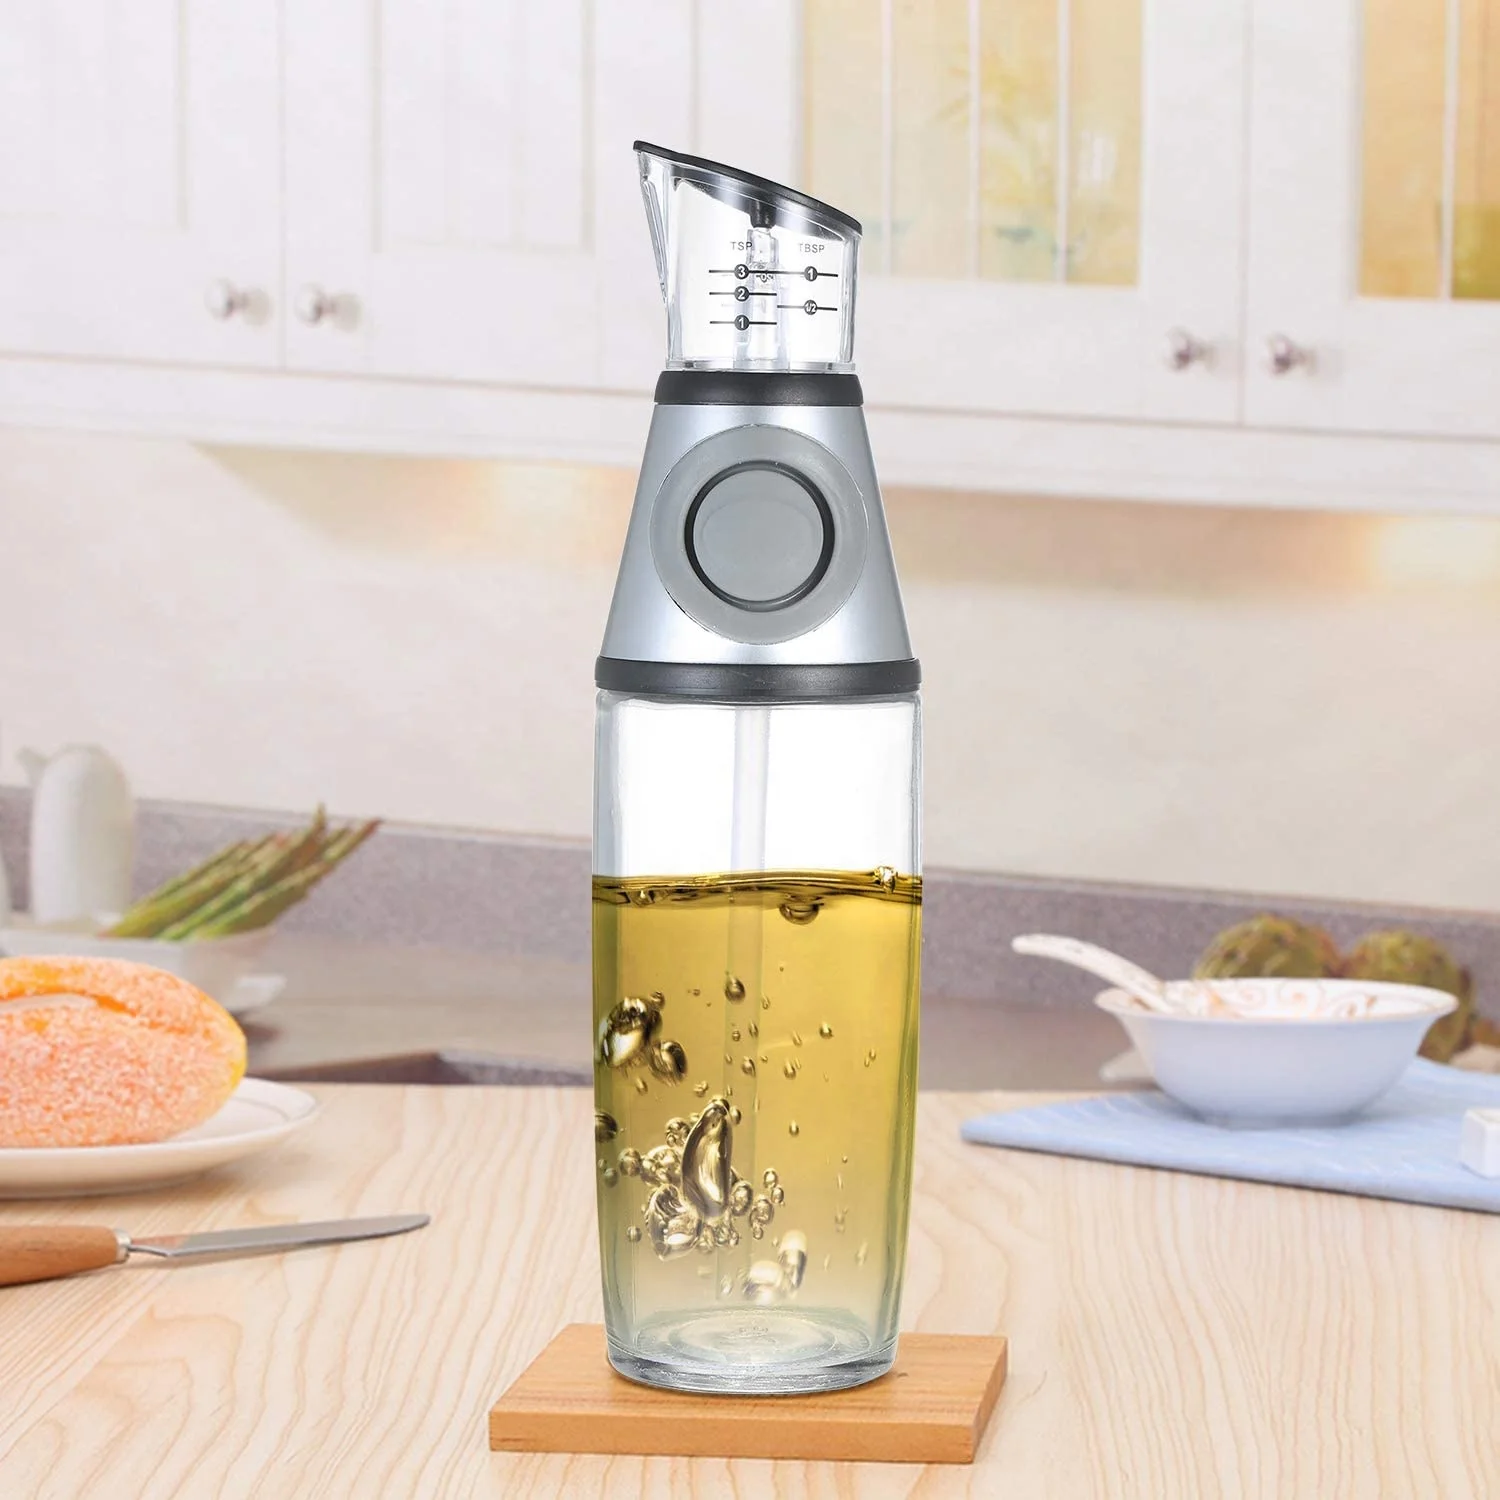 Olive Oil Dispenser Bottle For Kitchen, Oil and Vinegar Cruet Dispenser with Measurements and Drip-Free Spout 500ml